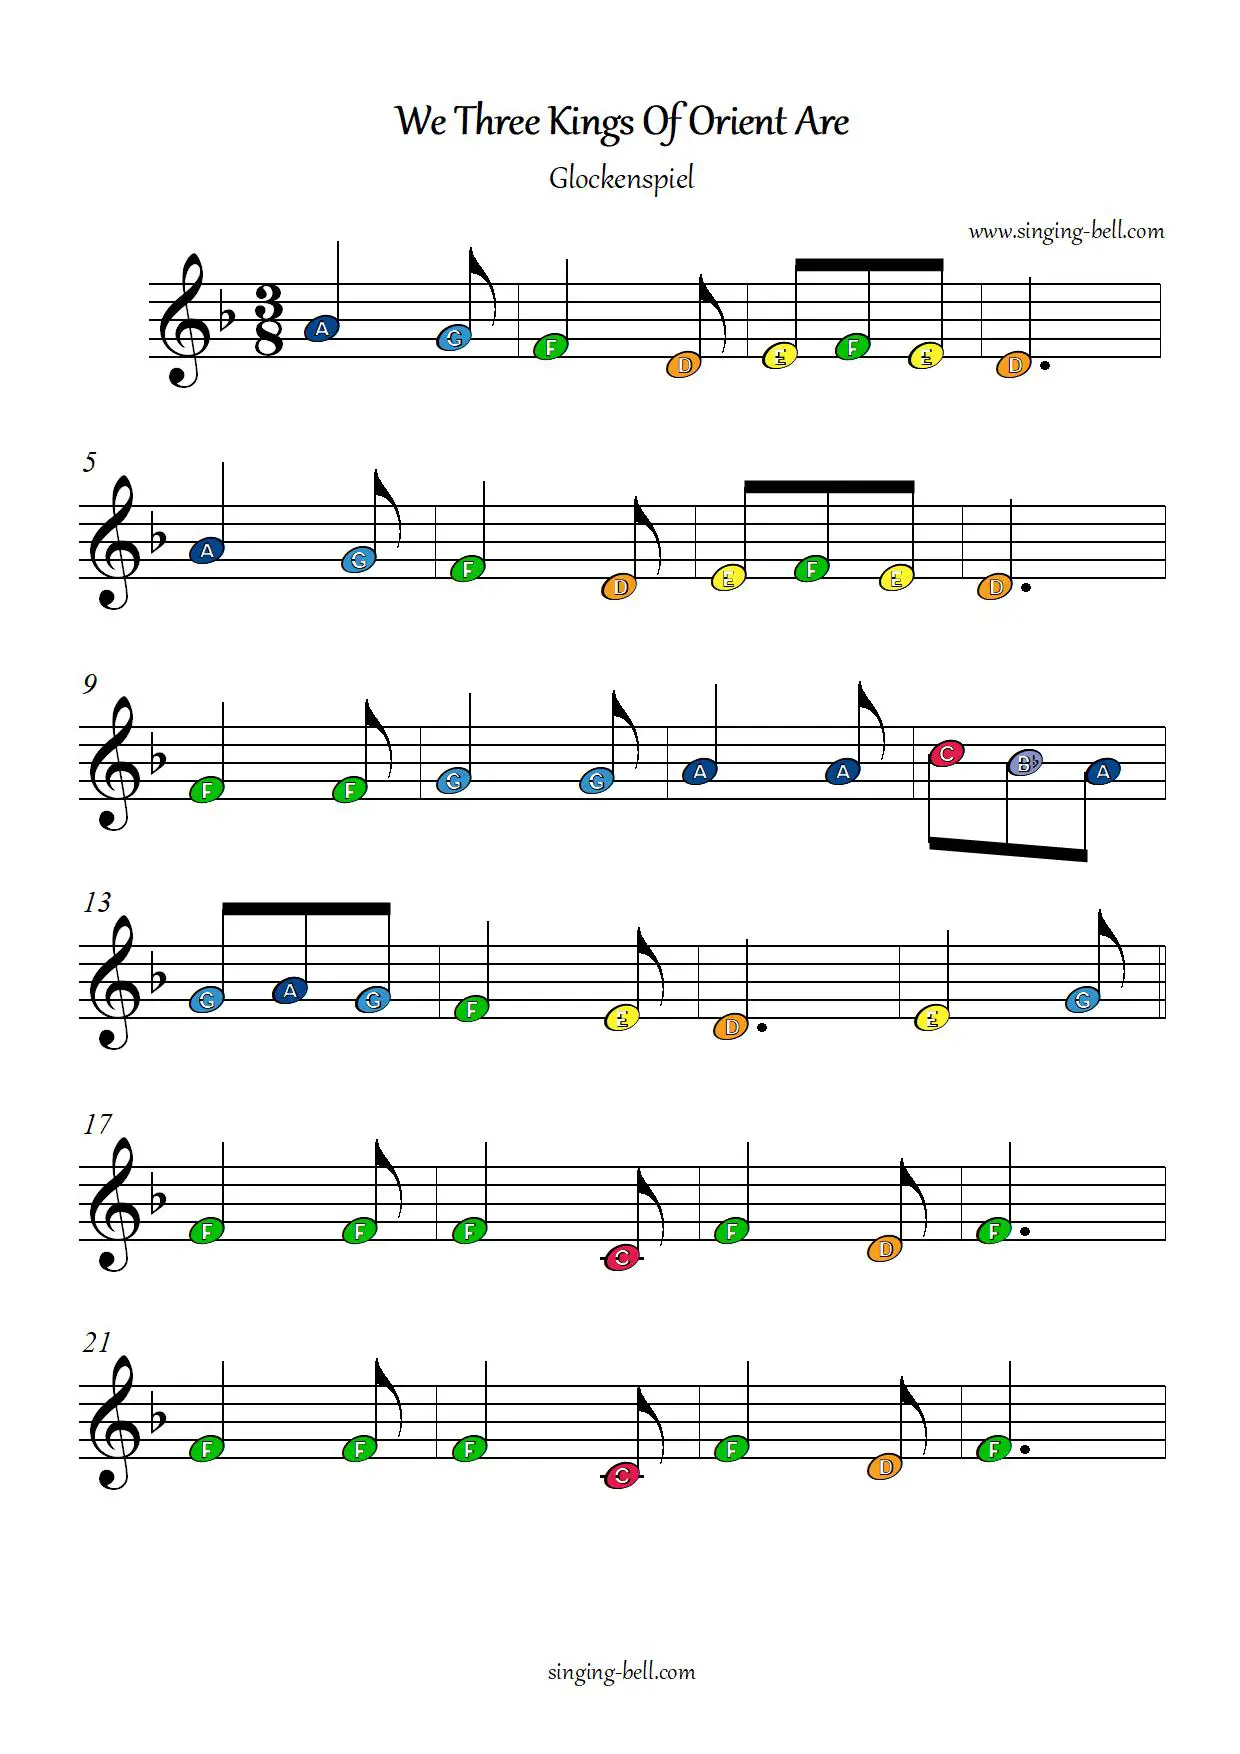 We Three Kings free xylophone glockenspiel sheet music color notes chart pdf p.1